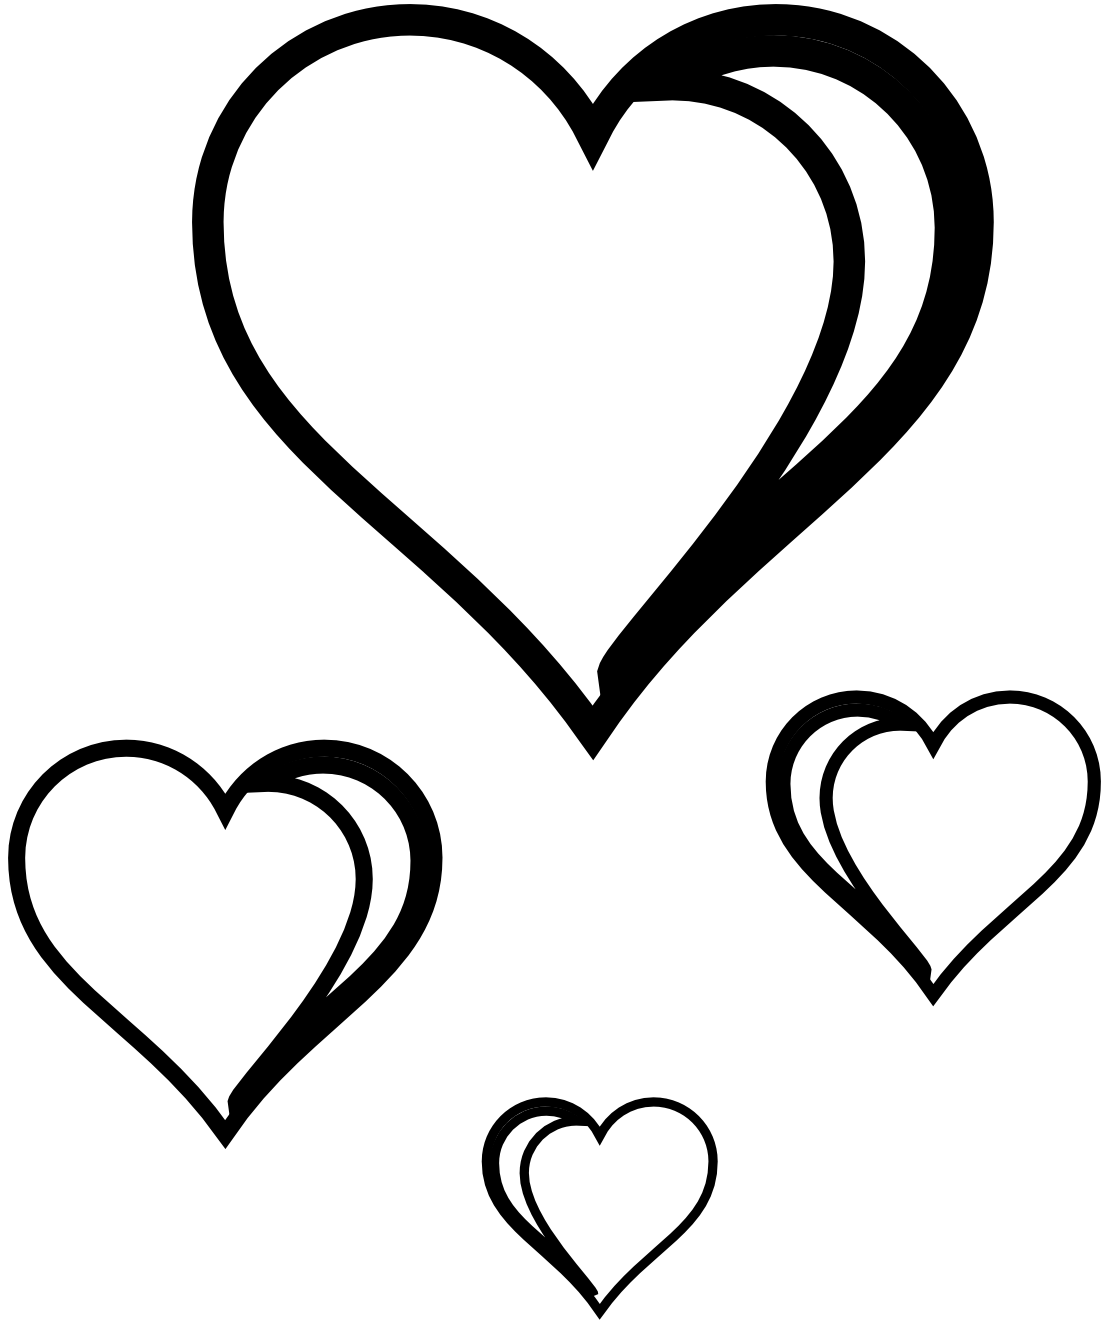 Free Hearts Black And White, Download Free Clip Art, Free